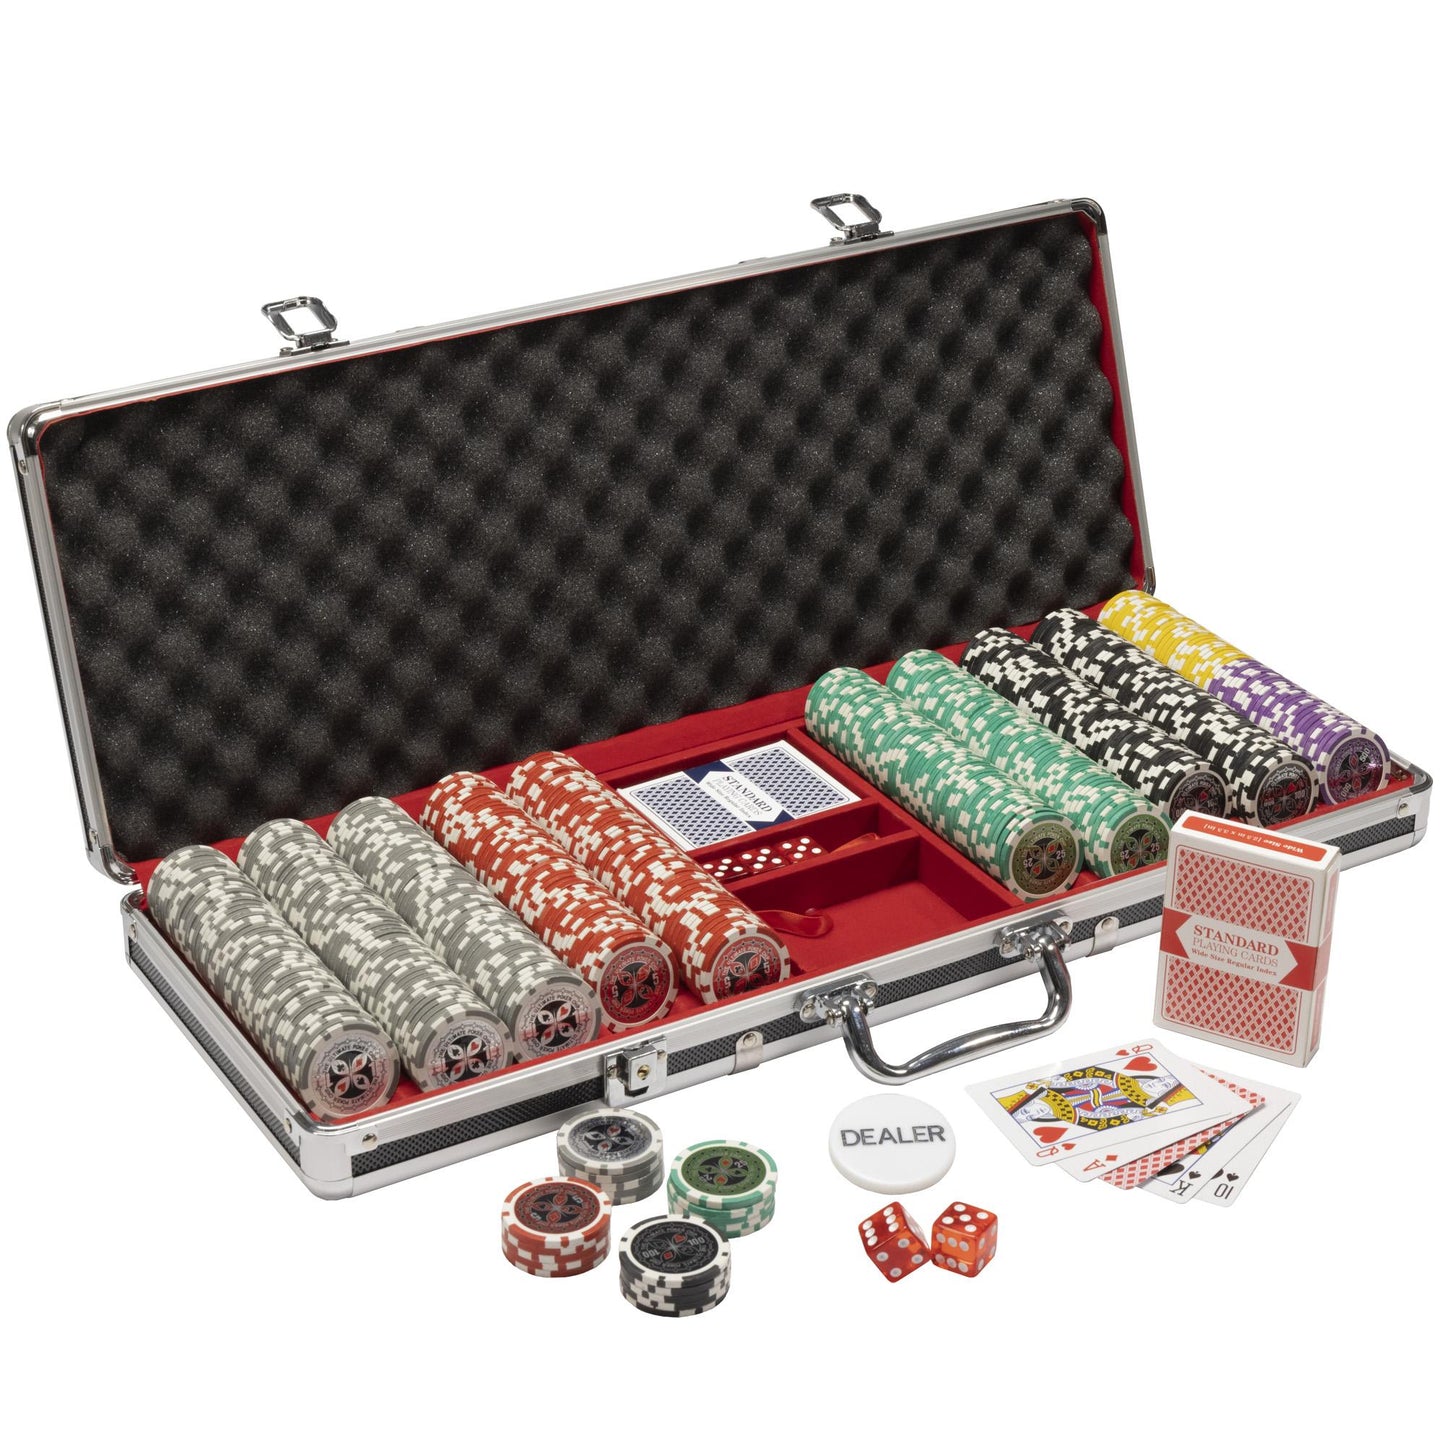 500 Ultimate Poker Chips with Black Aluminum Case